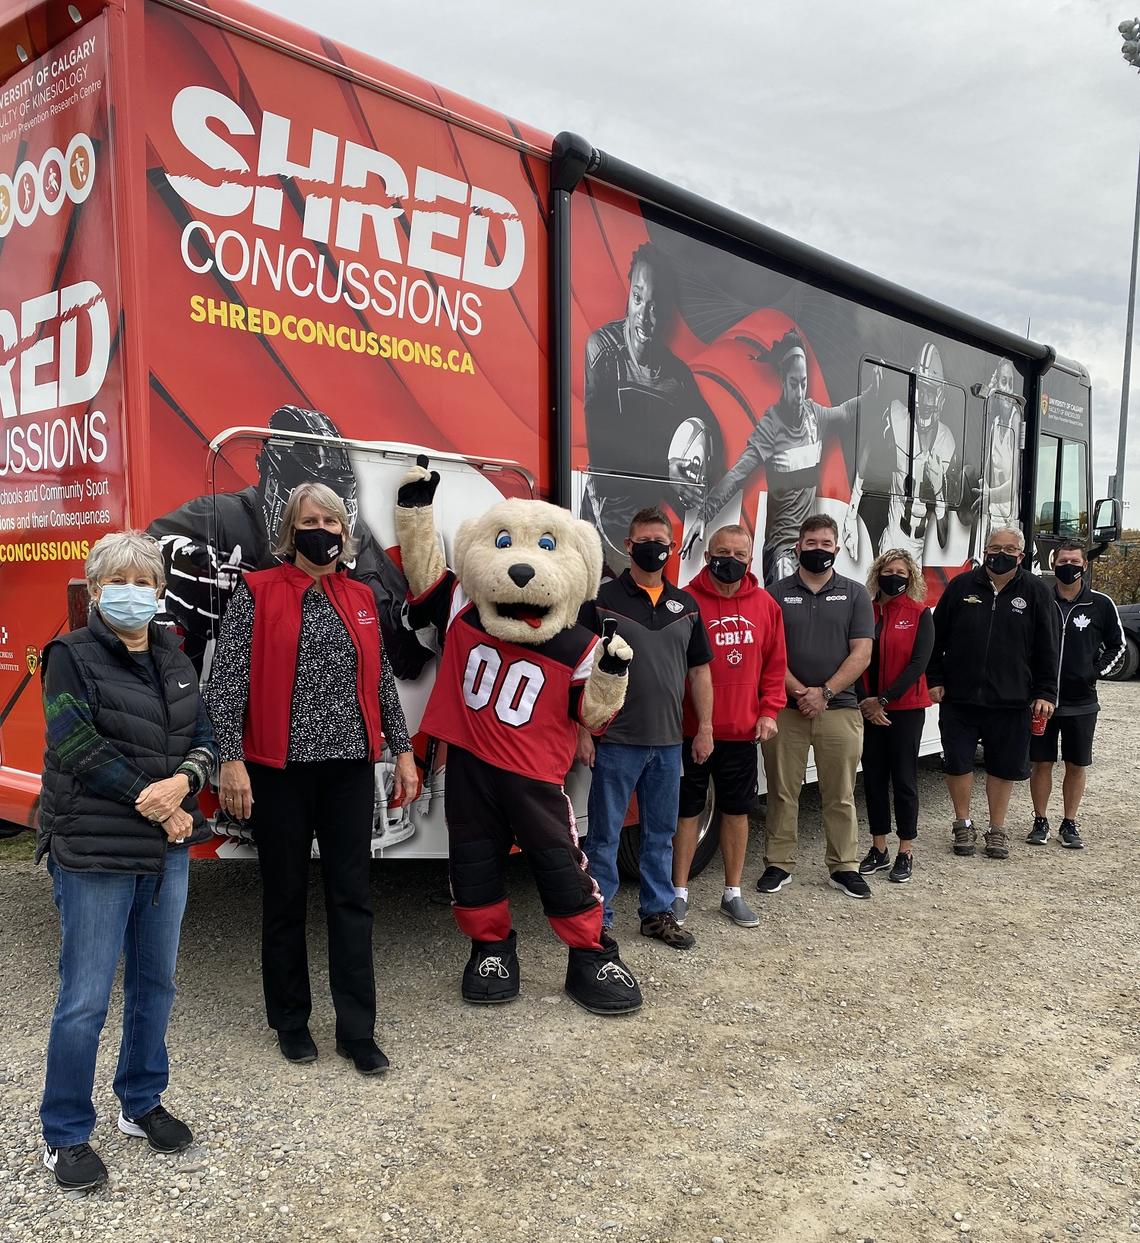 SHRed concussion team members and Bantam hockey league members standing in front of the SHRed Mobile